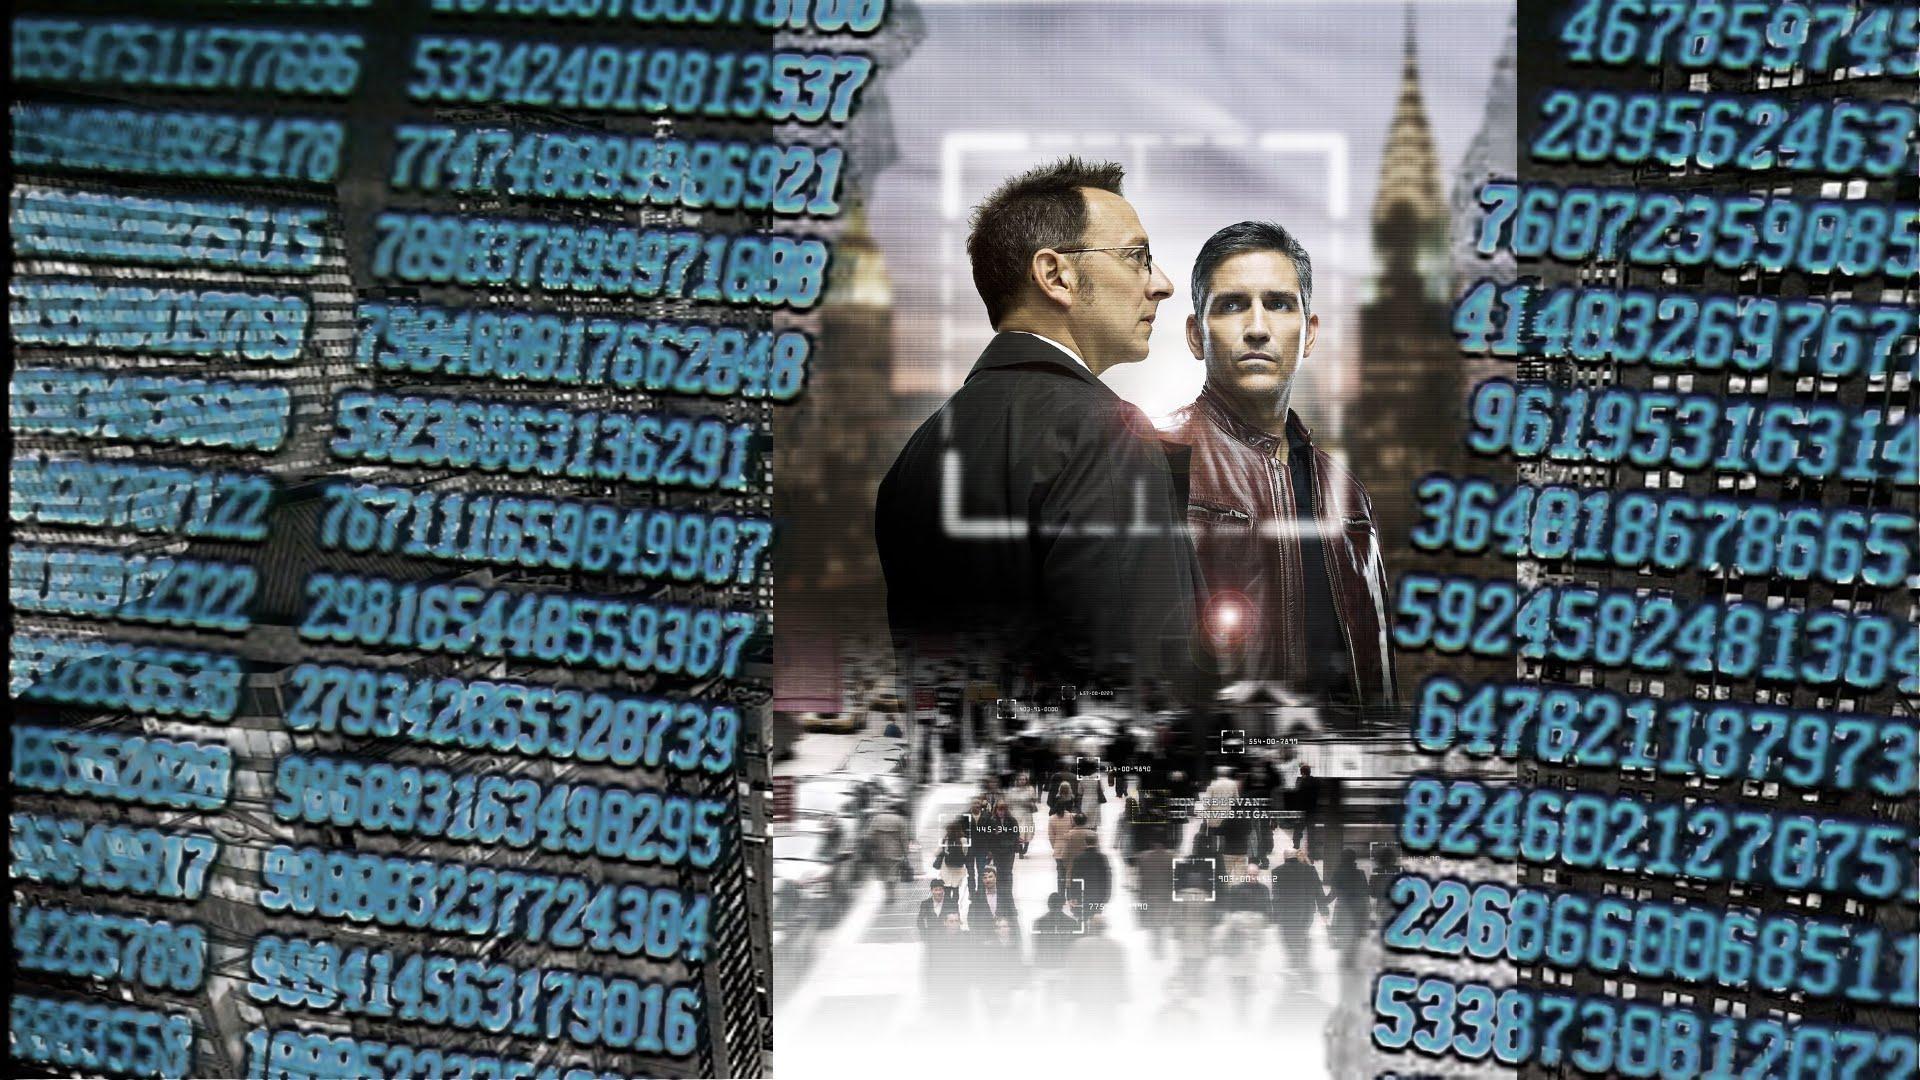 Person Of Interest Wallpaper, Picture, Image